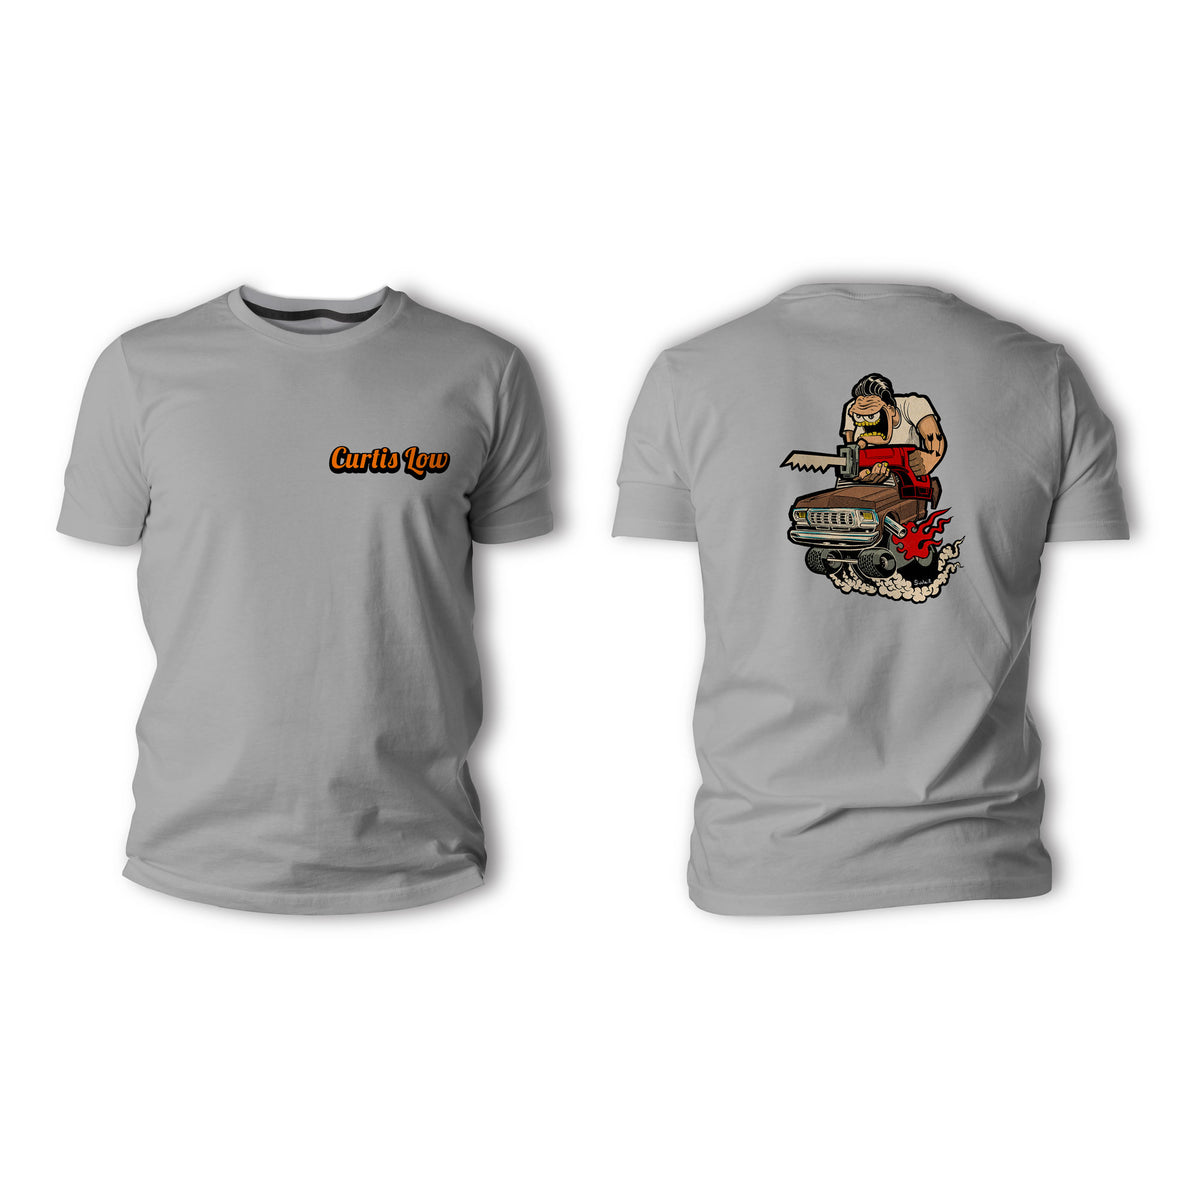 Flannel Hot Rods Shirts and Hoodies